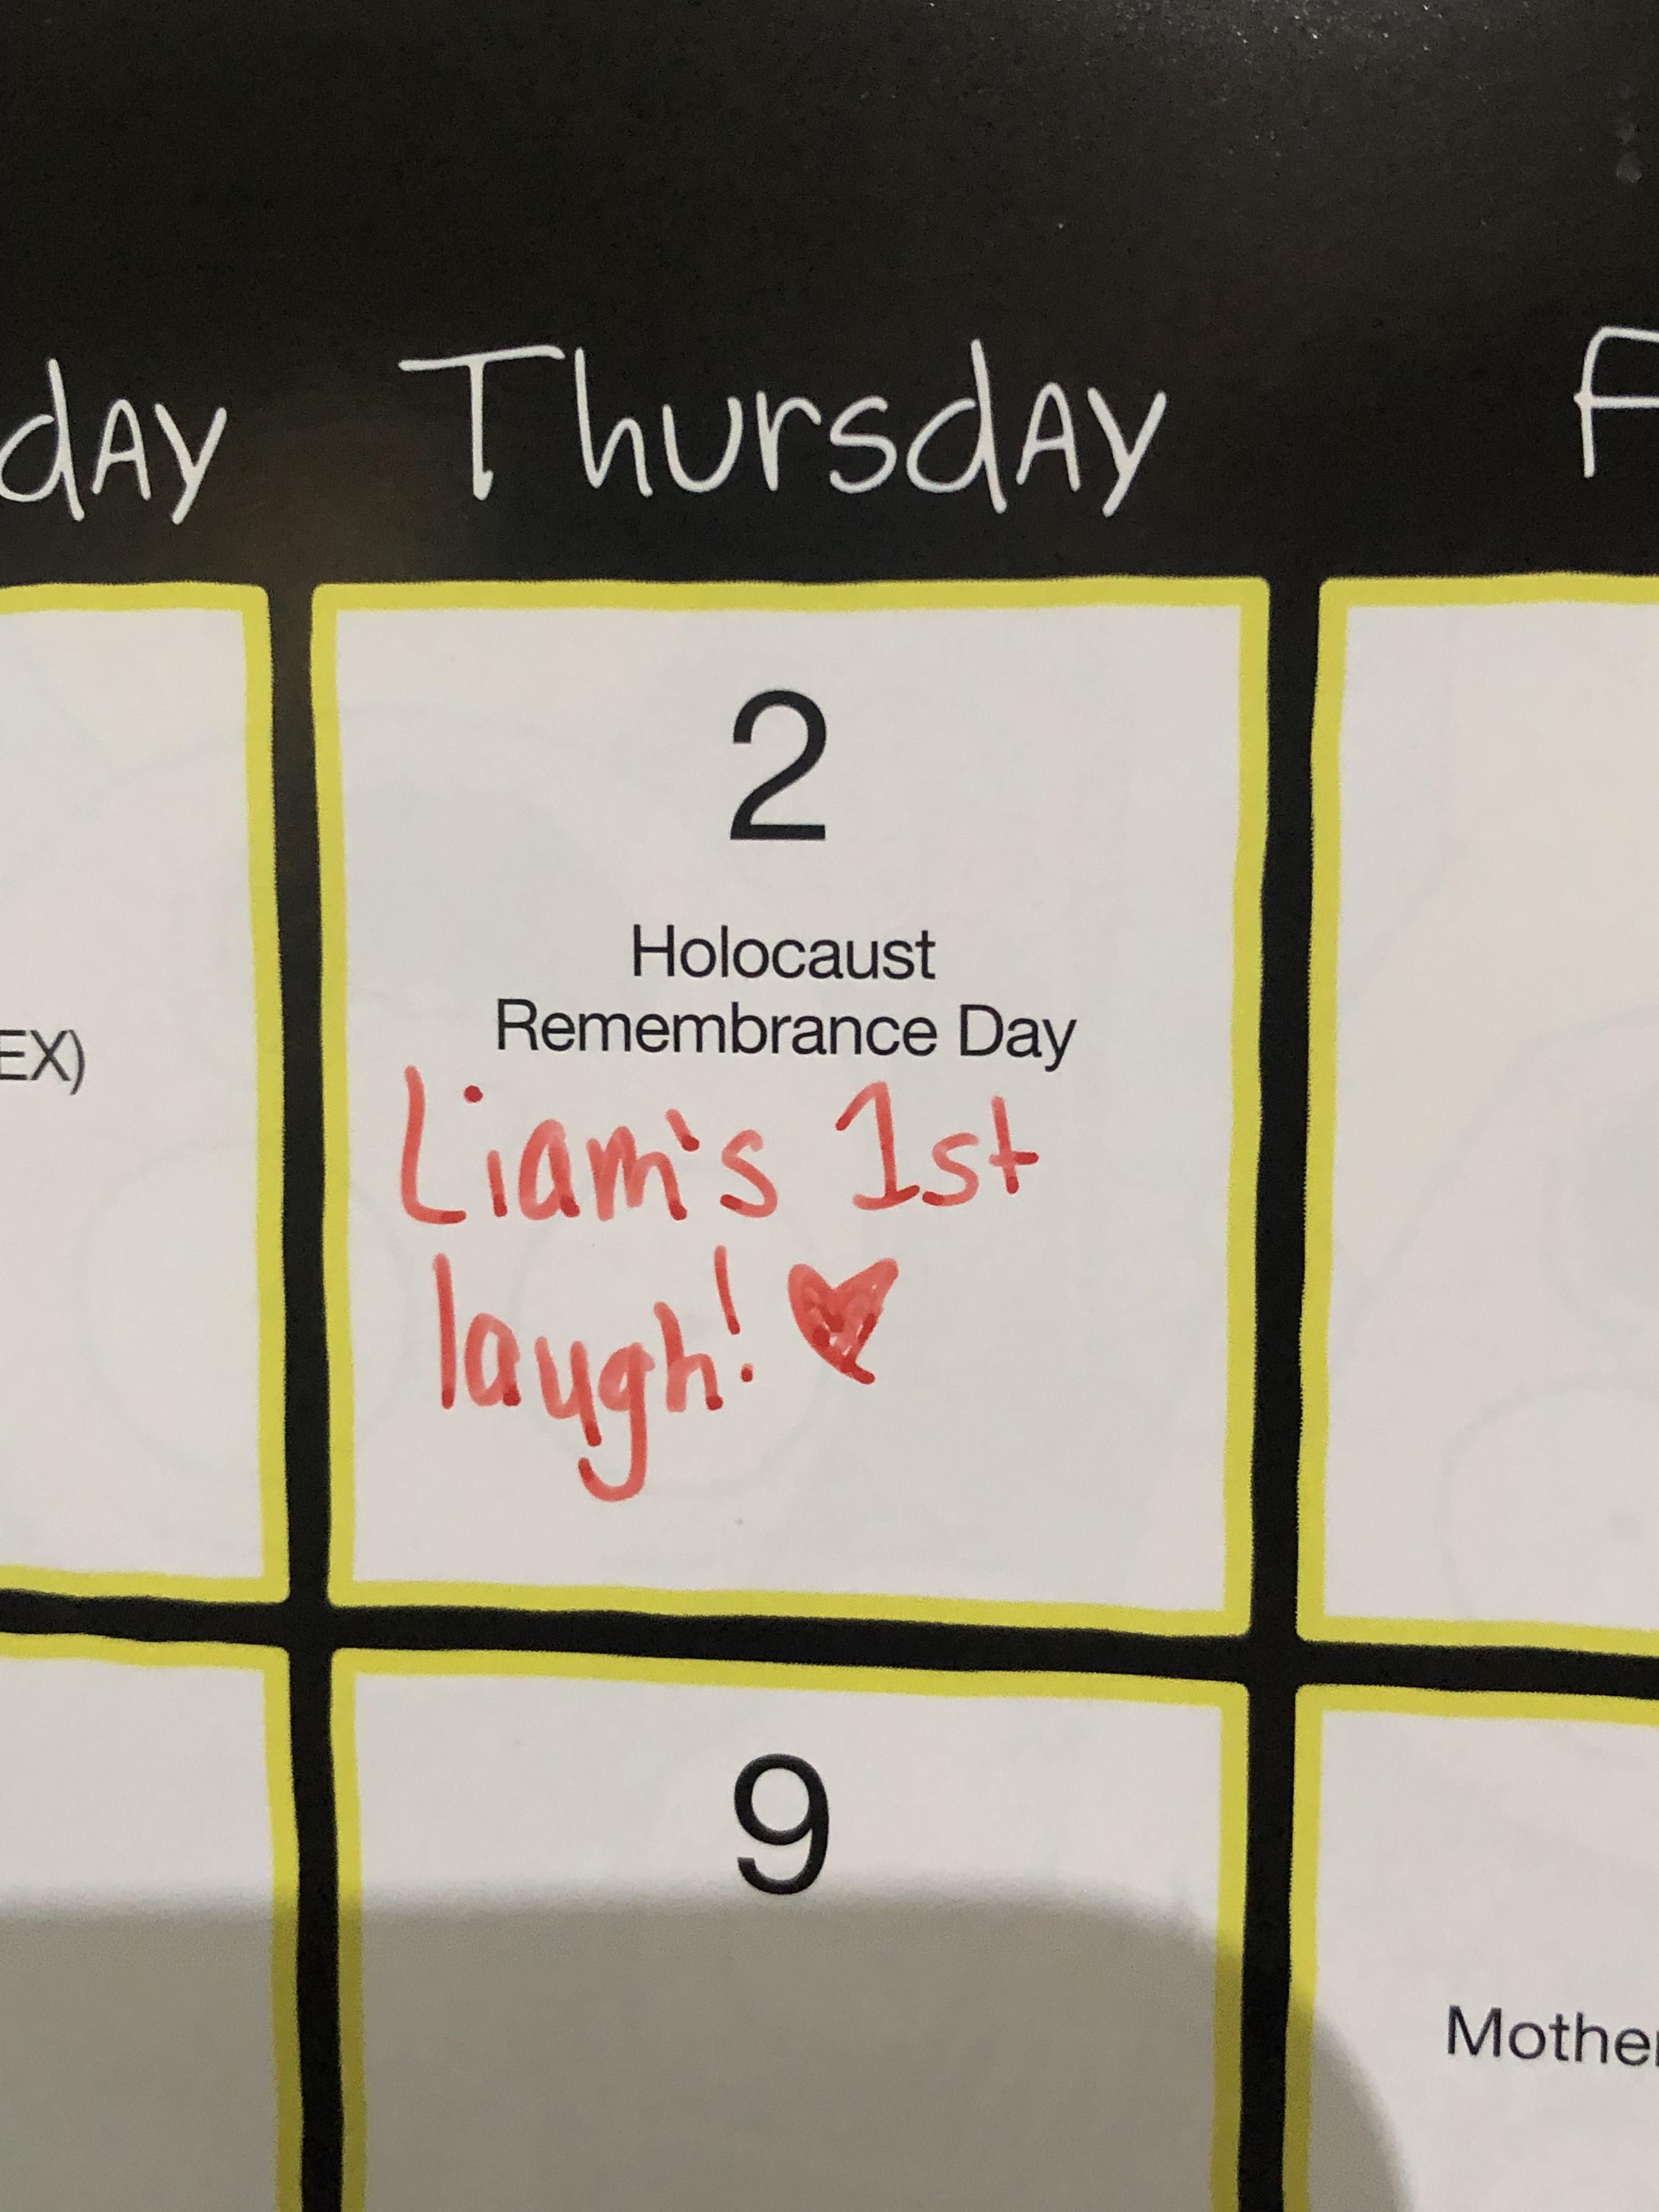 My son just turned a month old, and my wife has been keeping track of his firsts on our calendar. I just noticed this today.